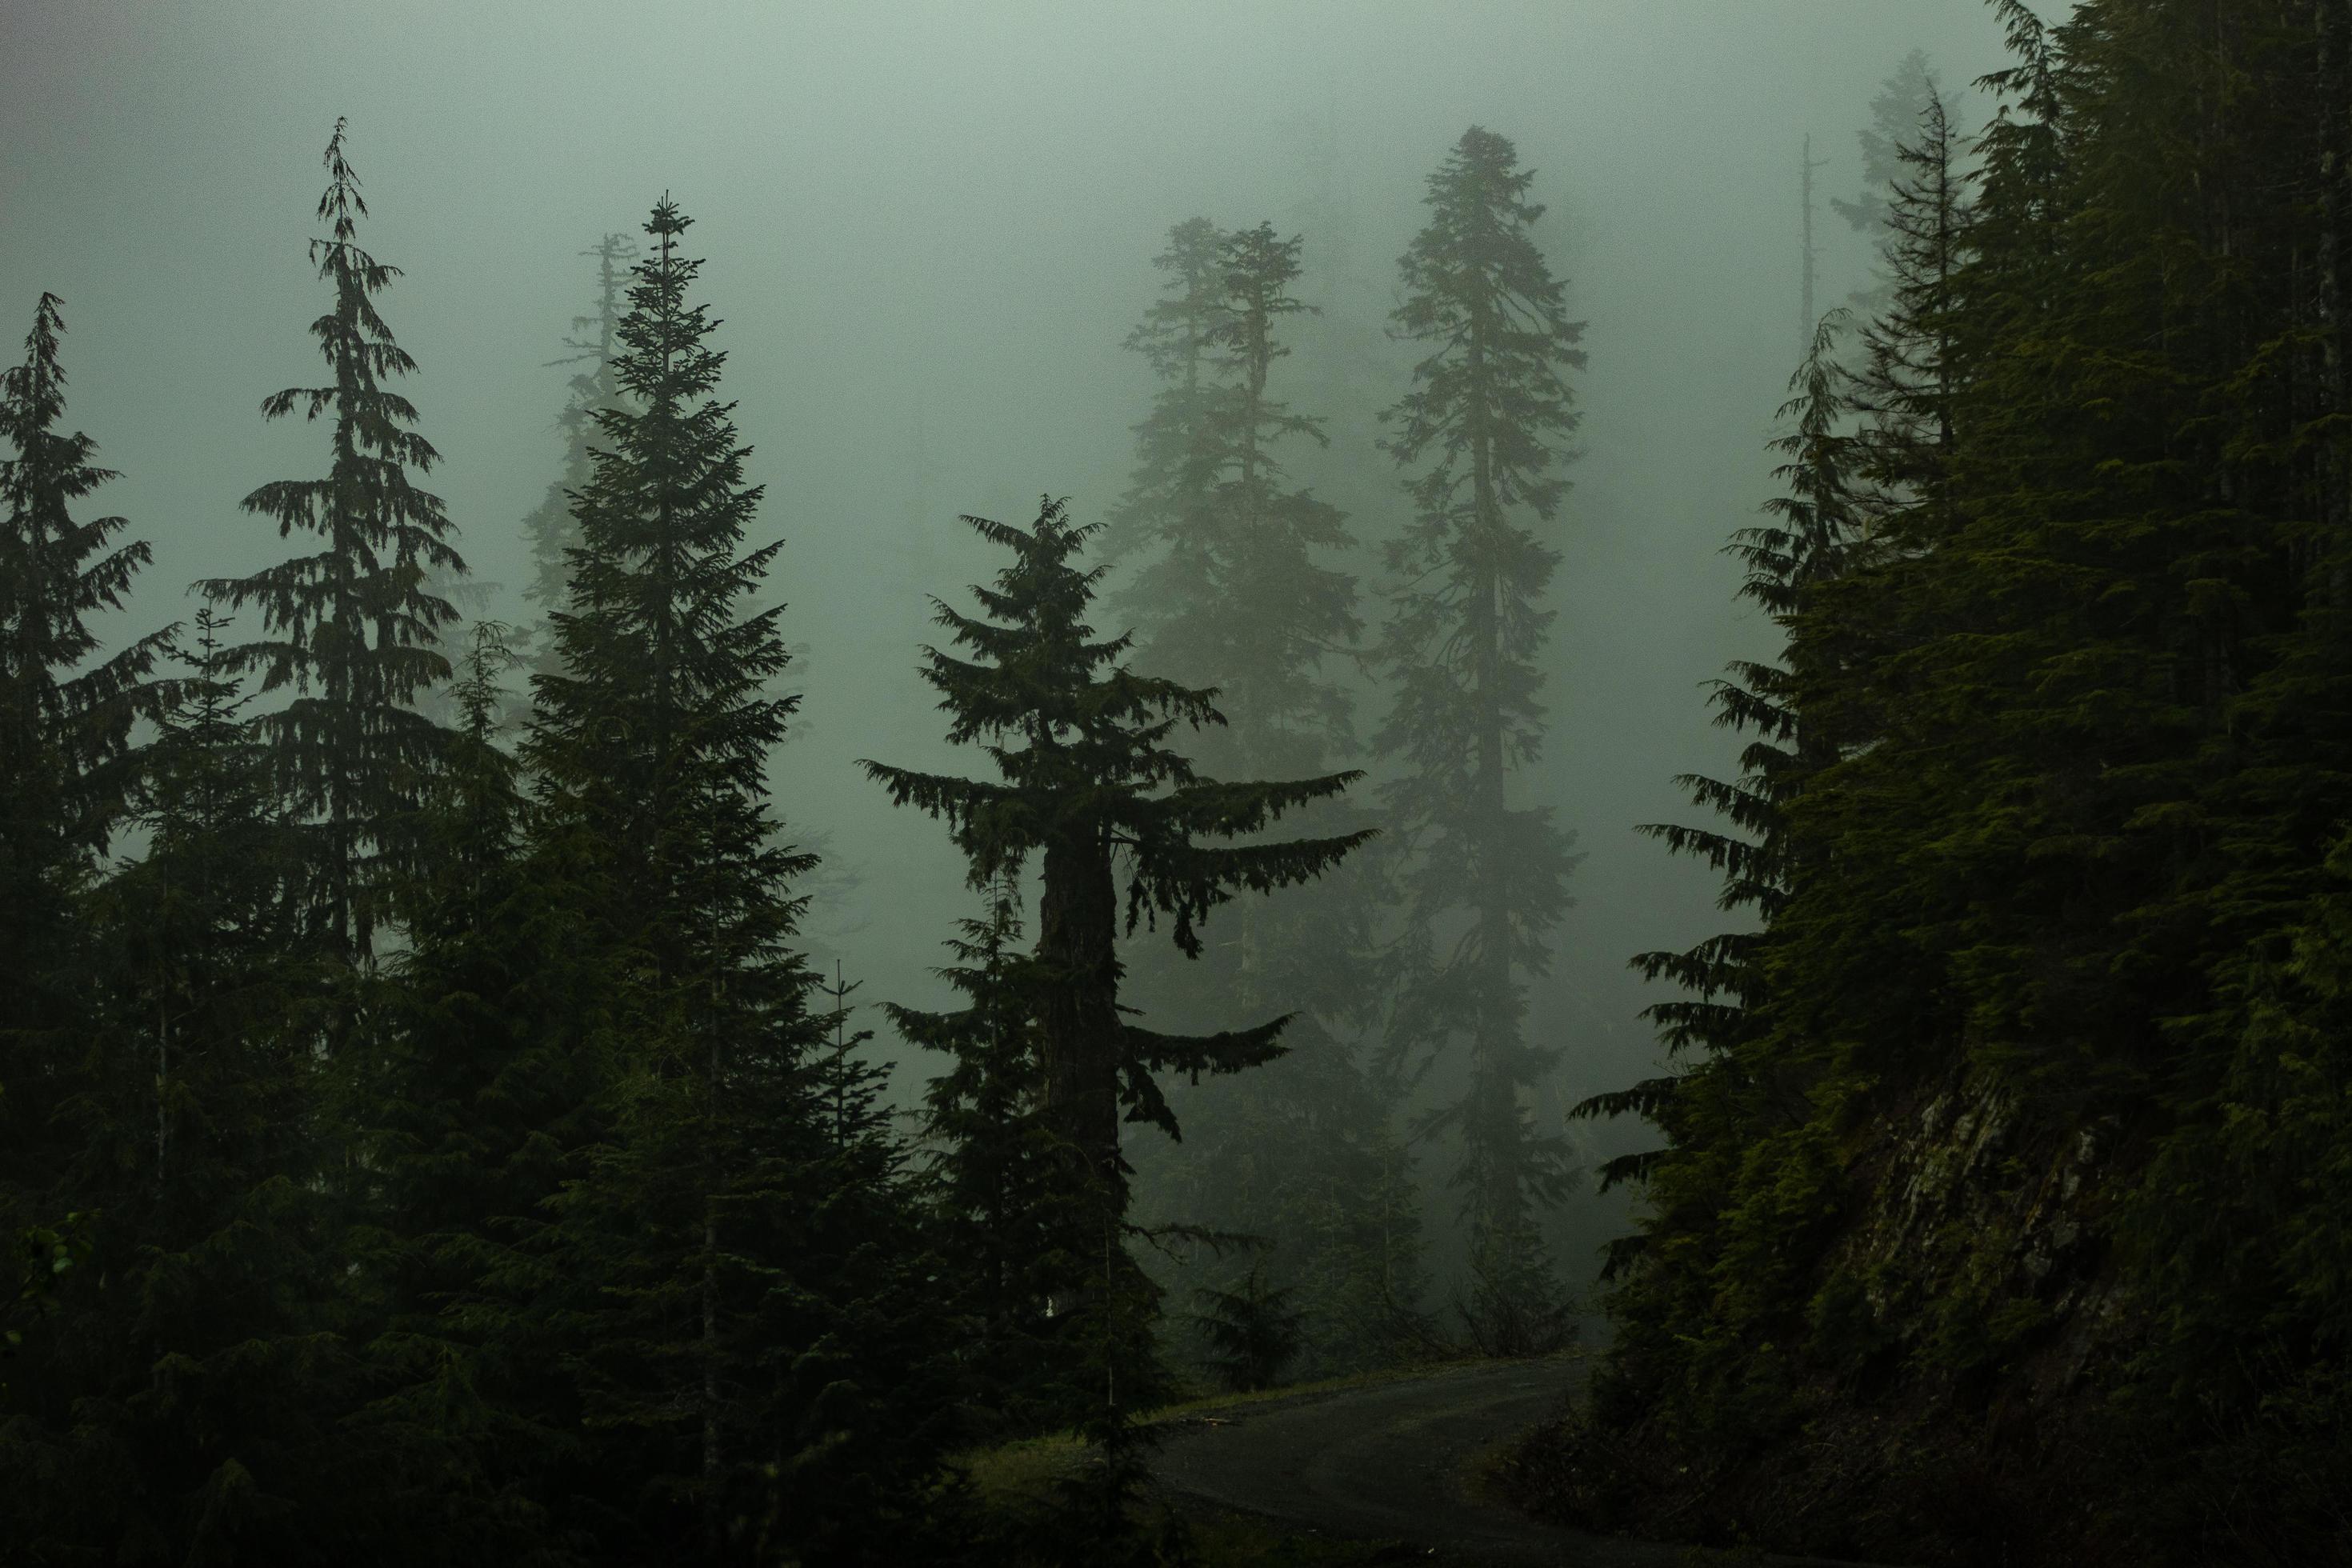 Pine trees in a dark foggy forest